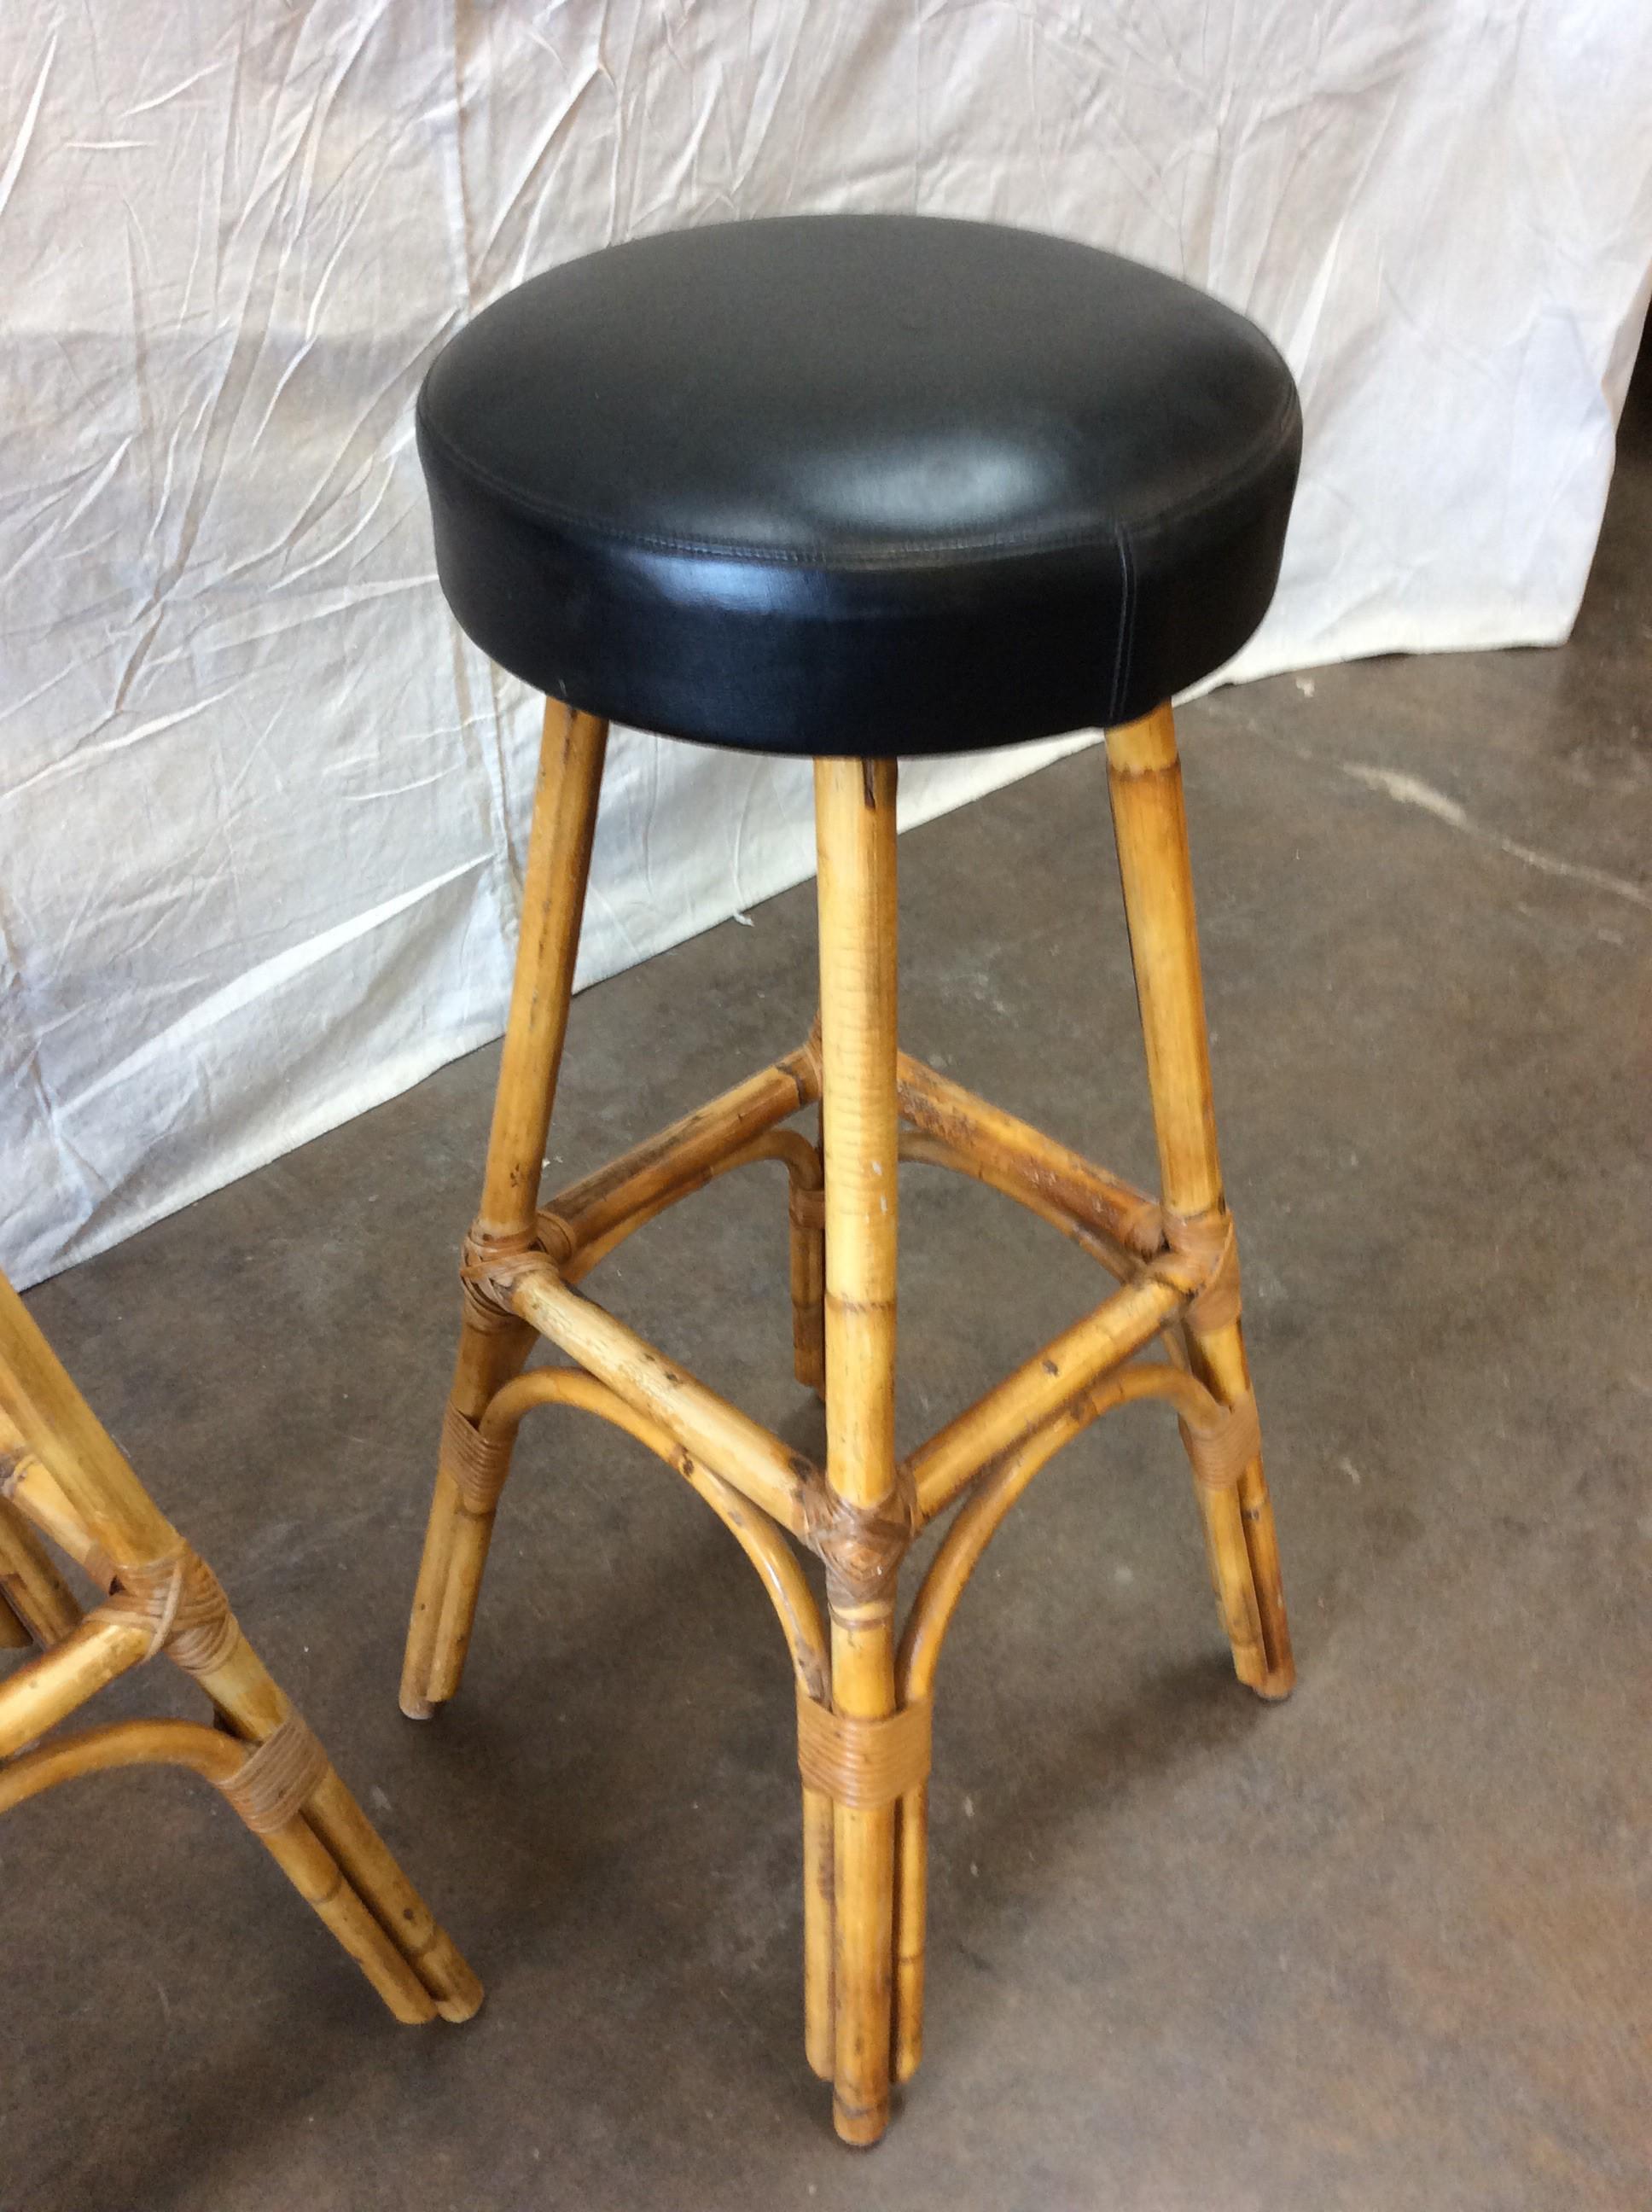 1950s French Rattan and Bamboo Bar Stools - a Pair In Good Condition For Sale In Burton, TX